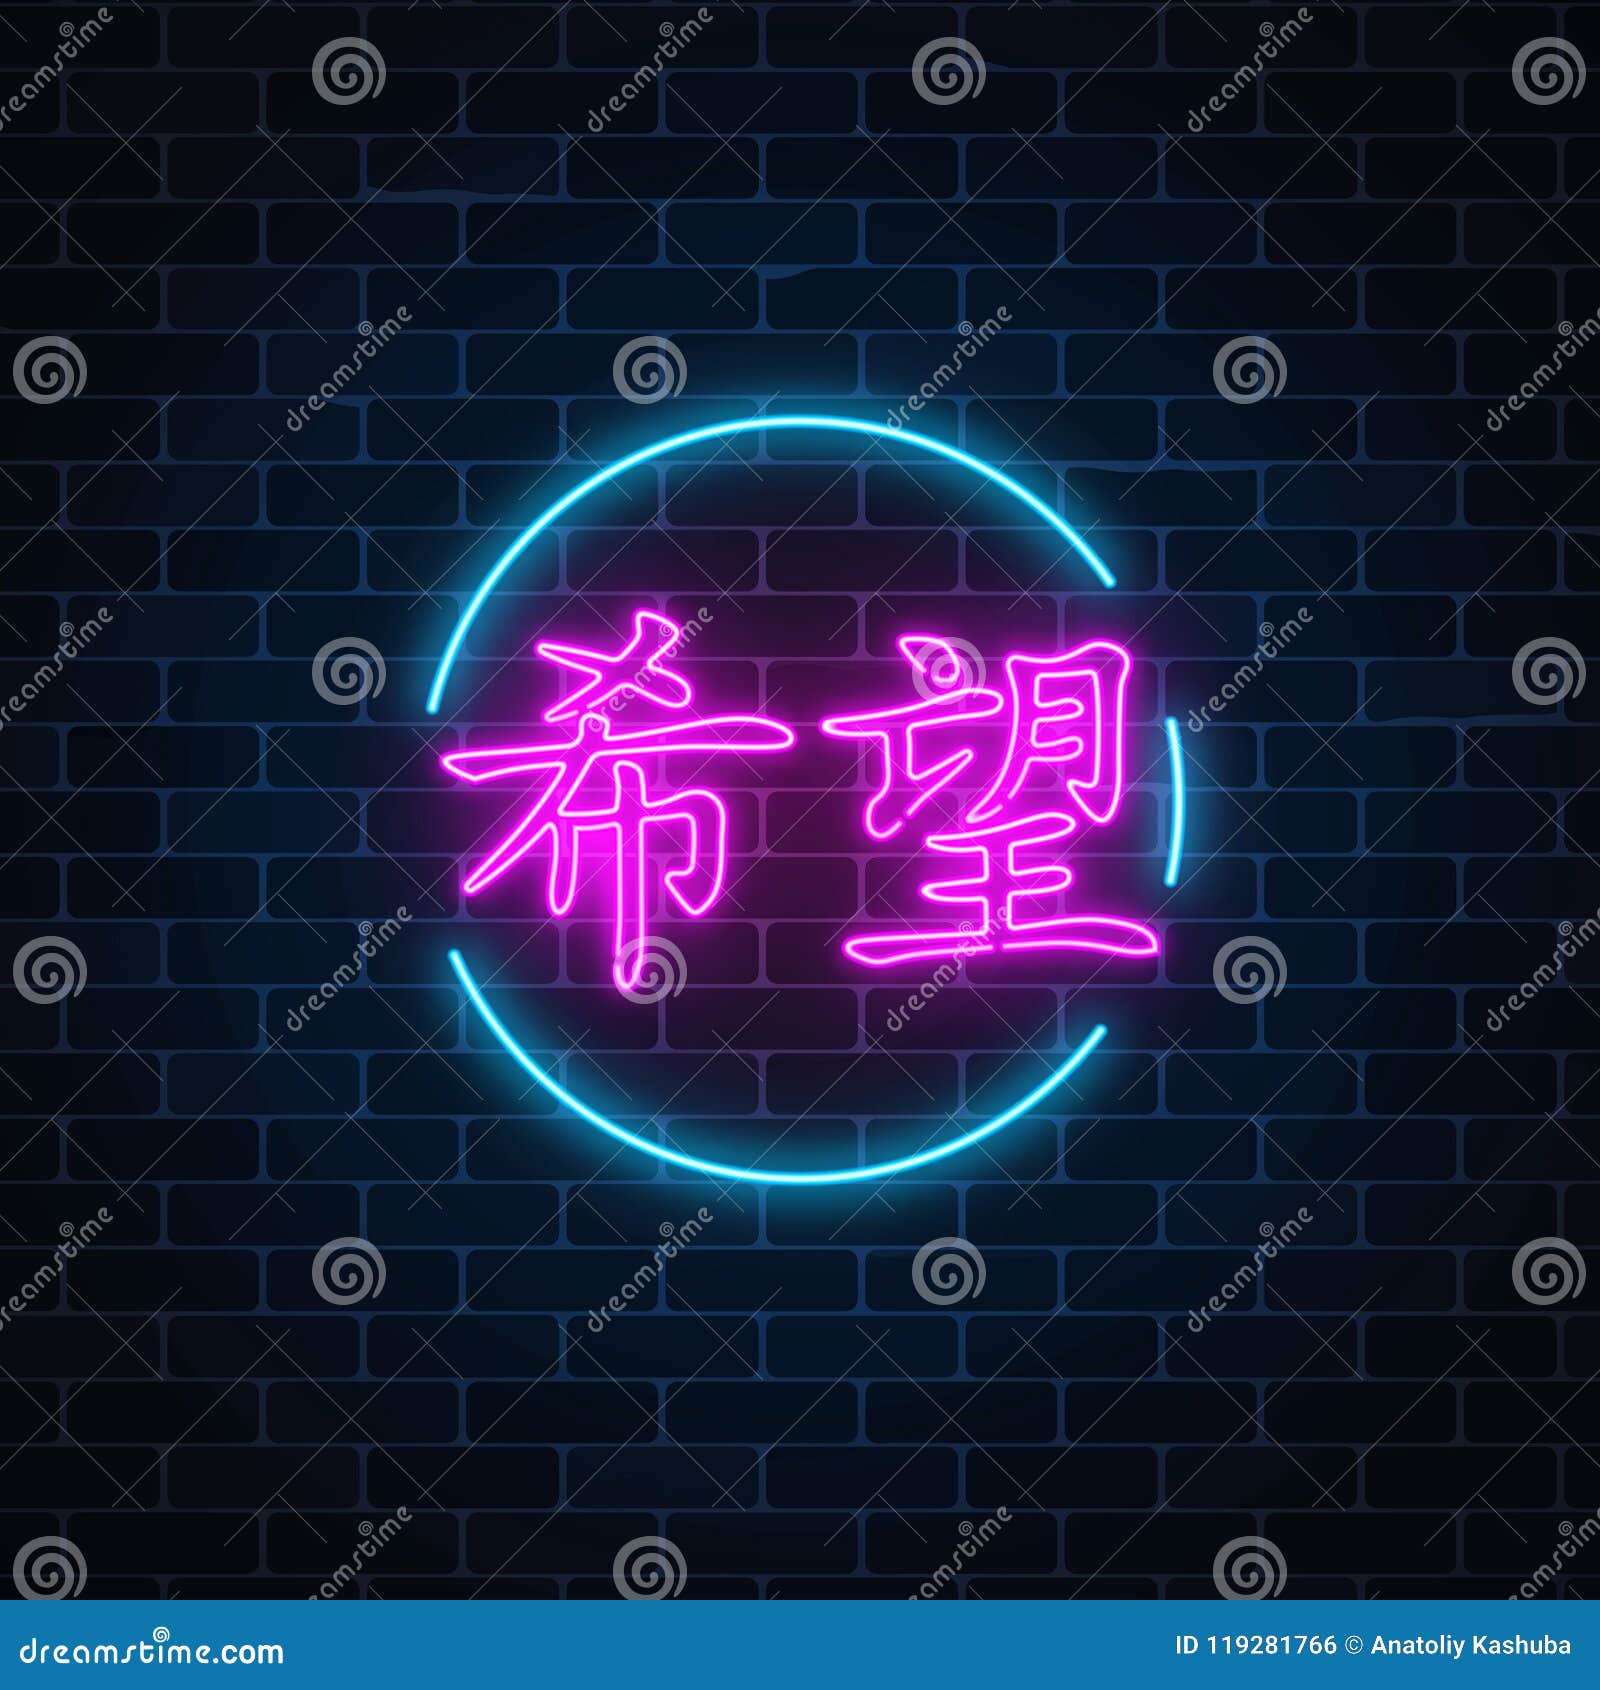 Neon sign of chinese hieroglyph means happiness in circle frame